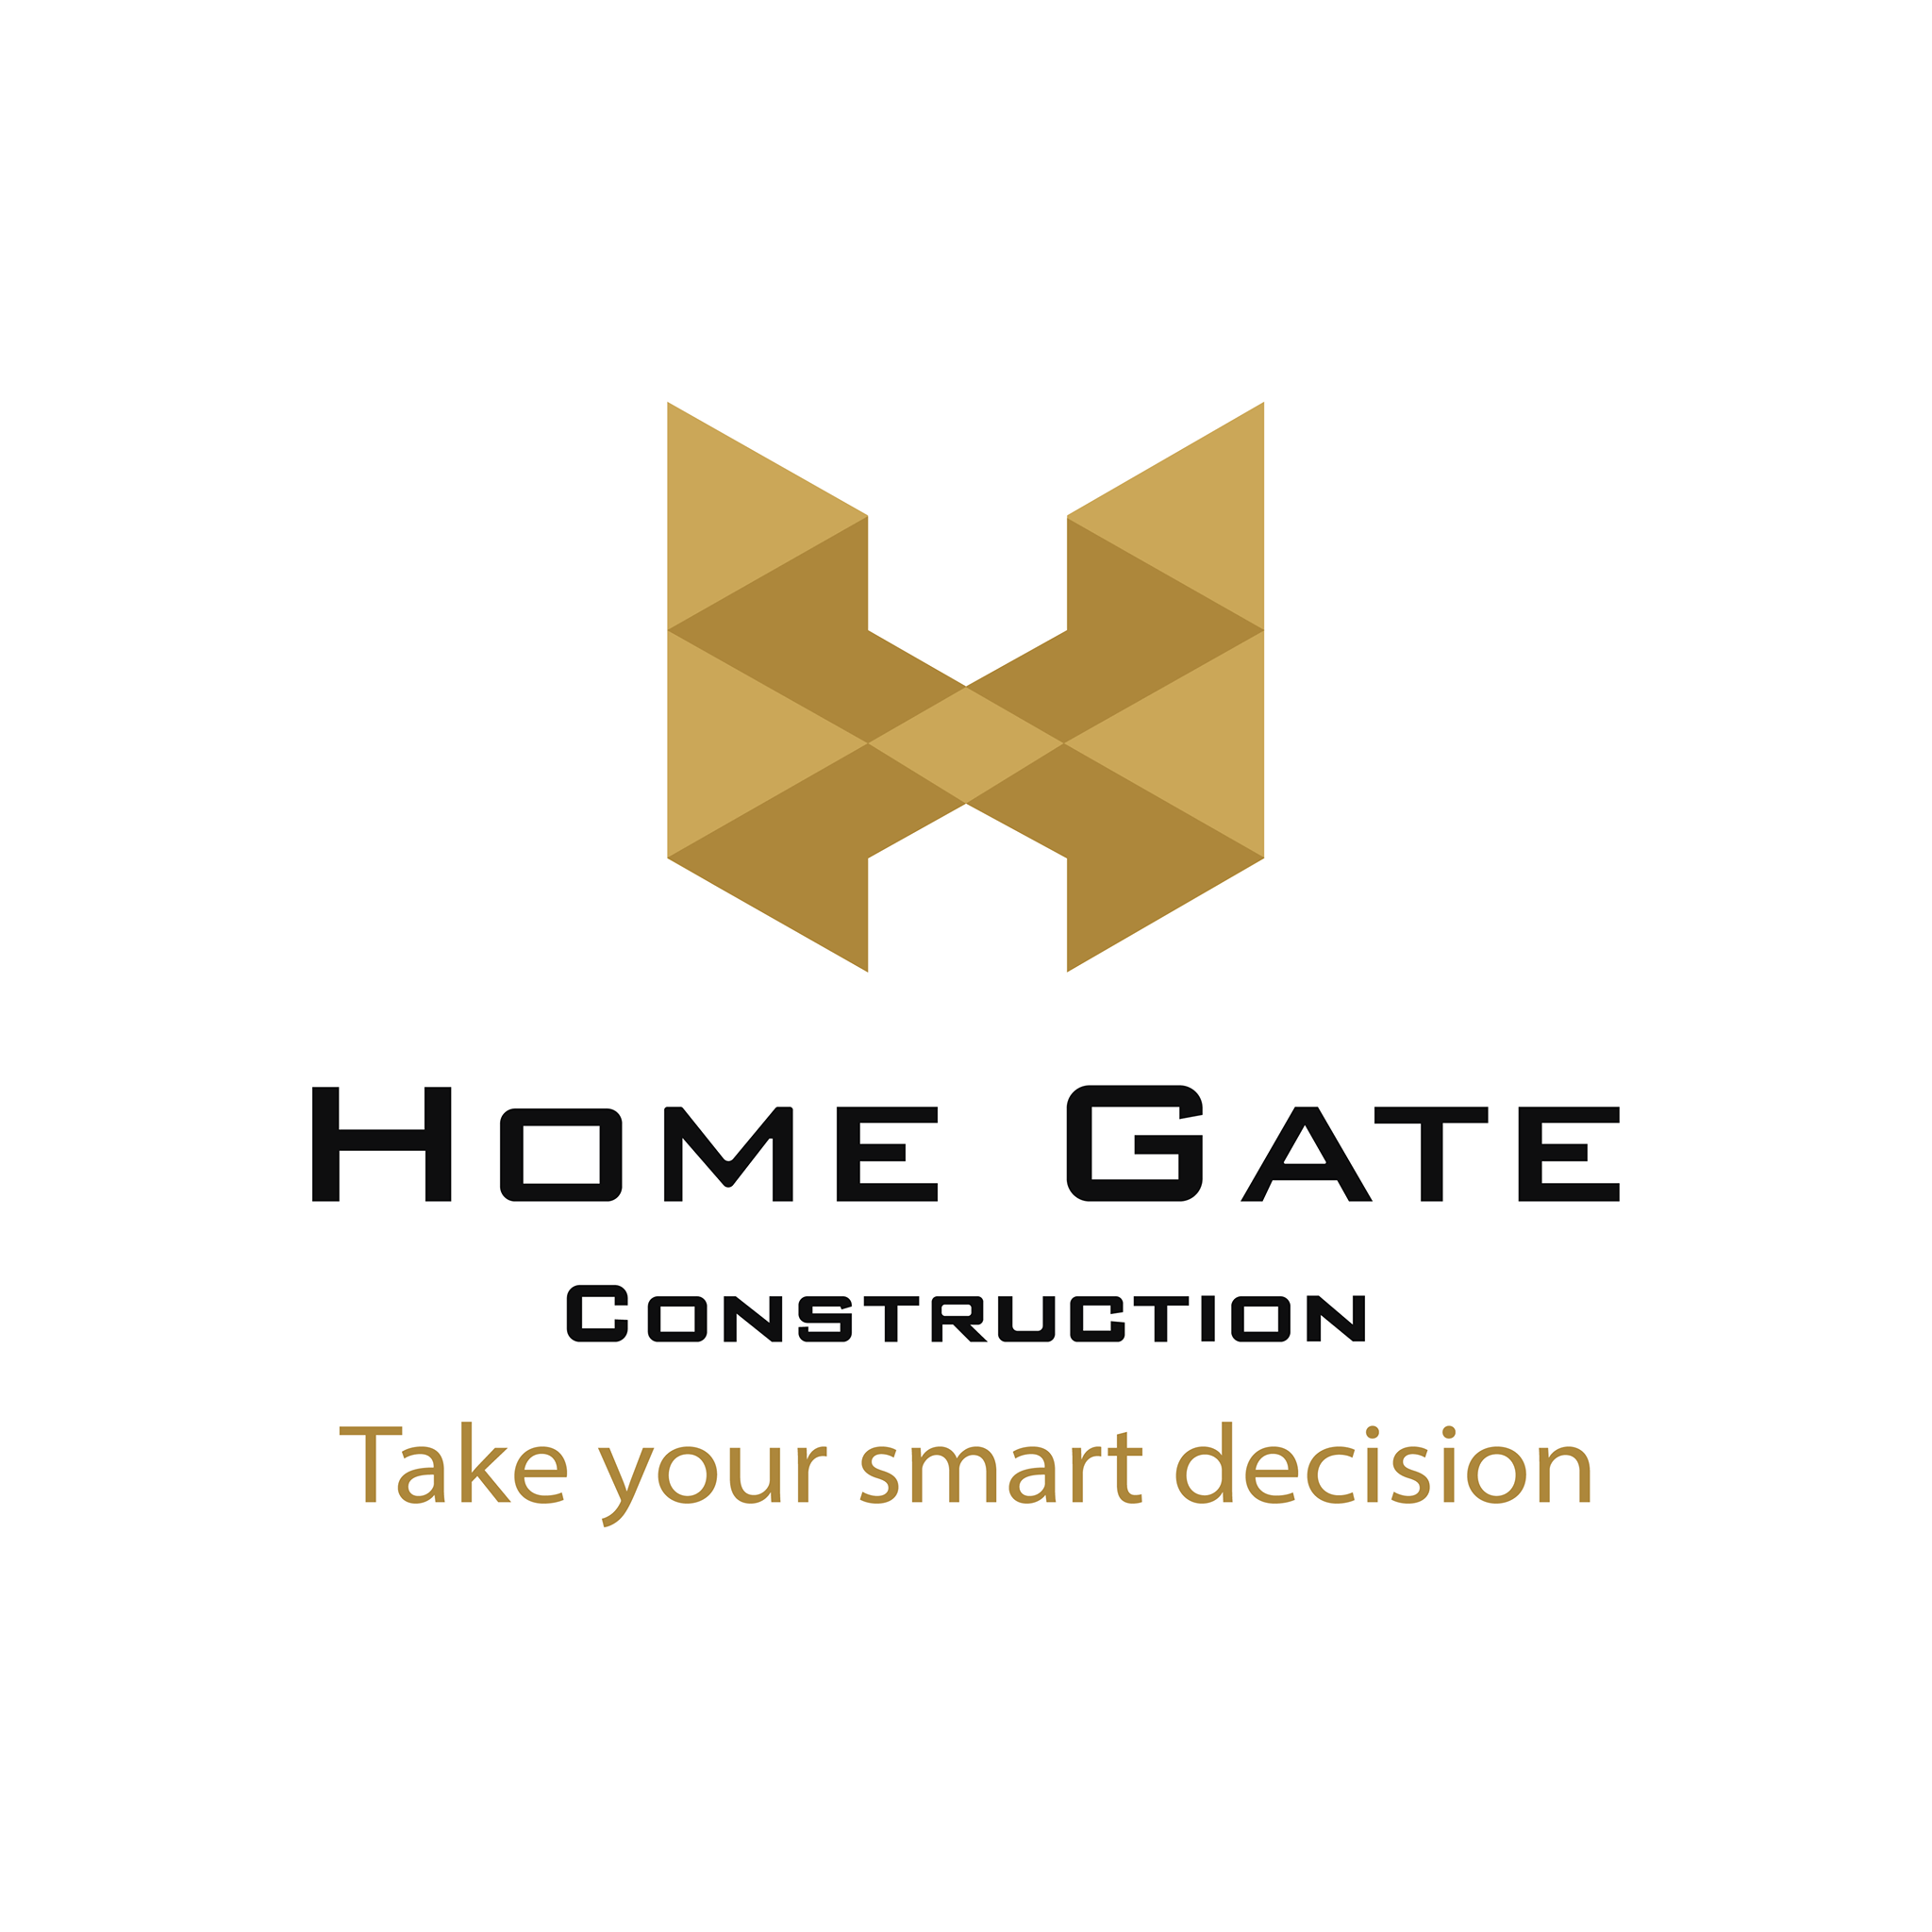 Home Gate Construction